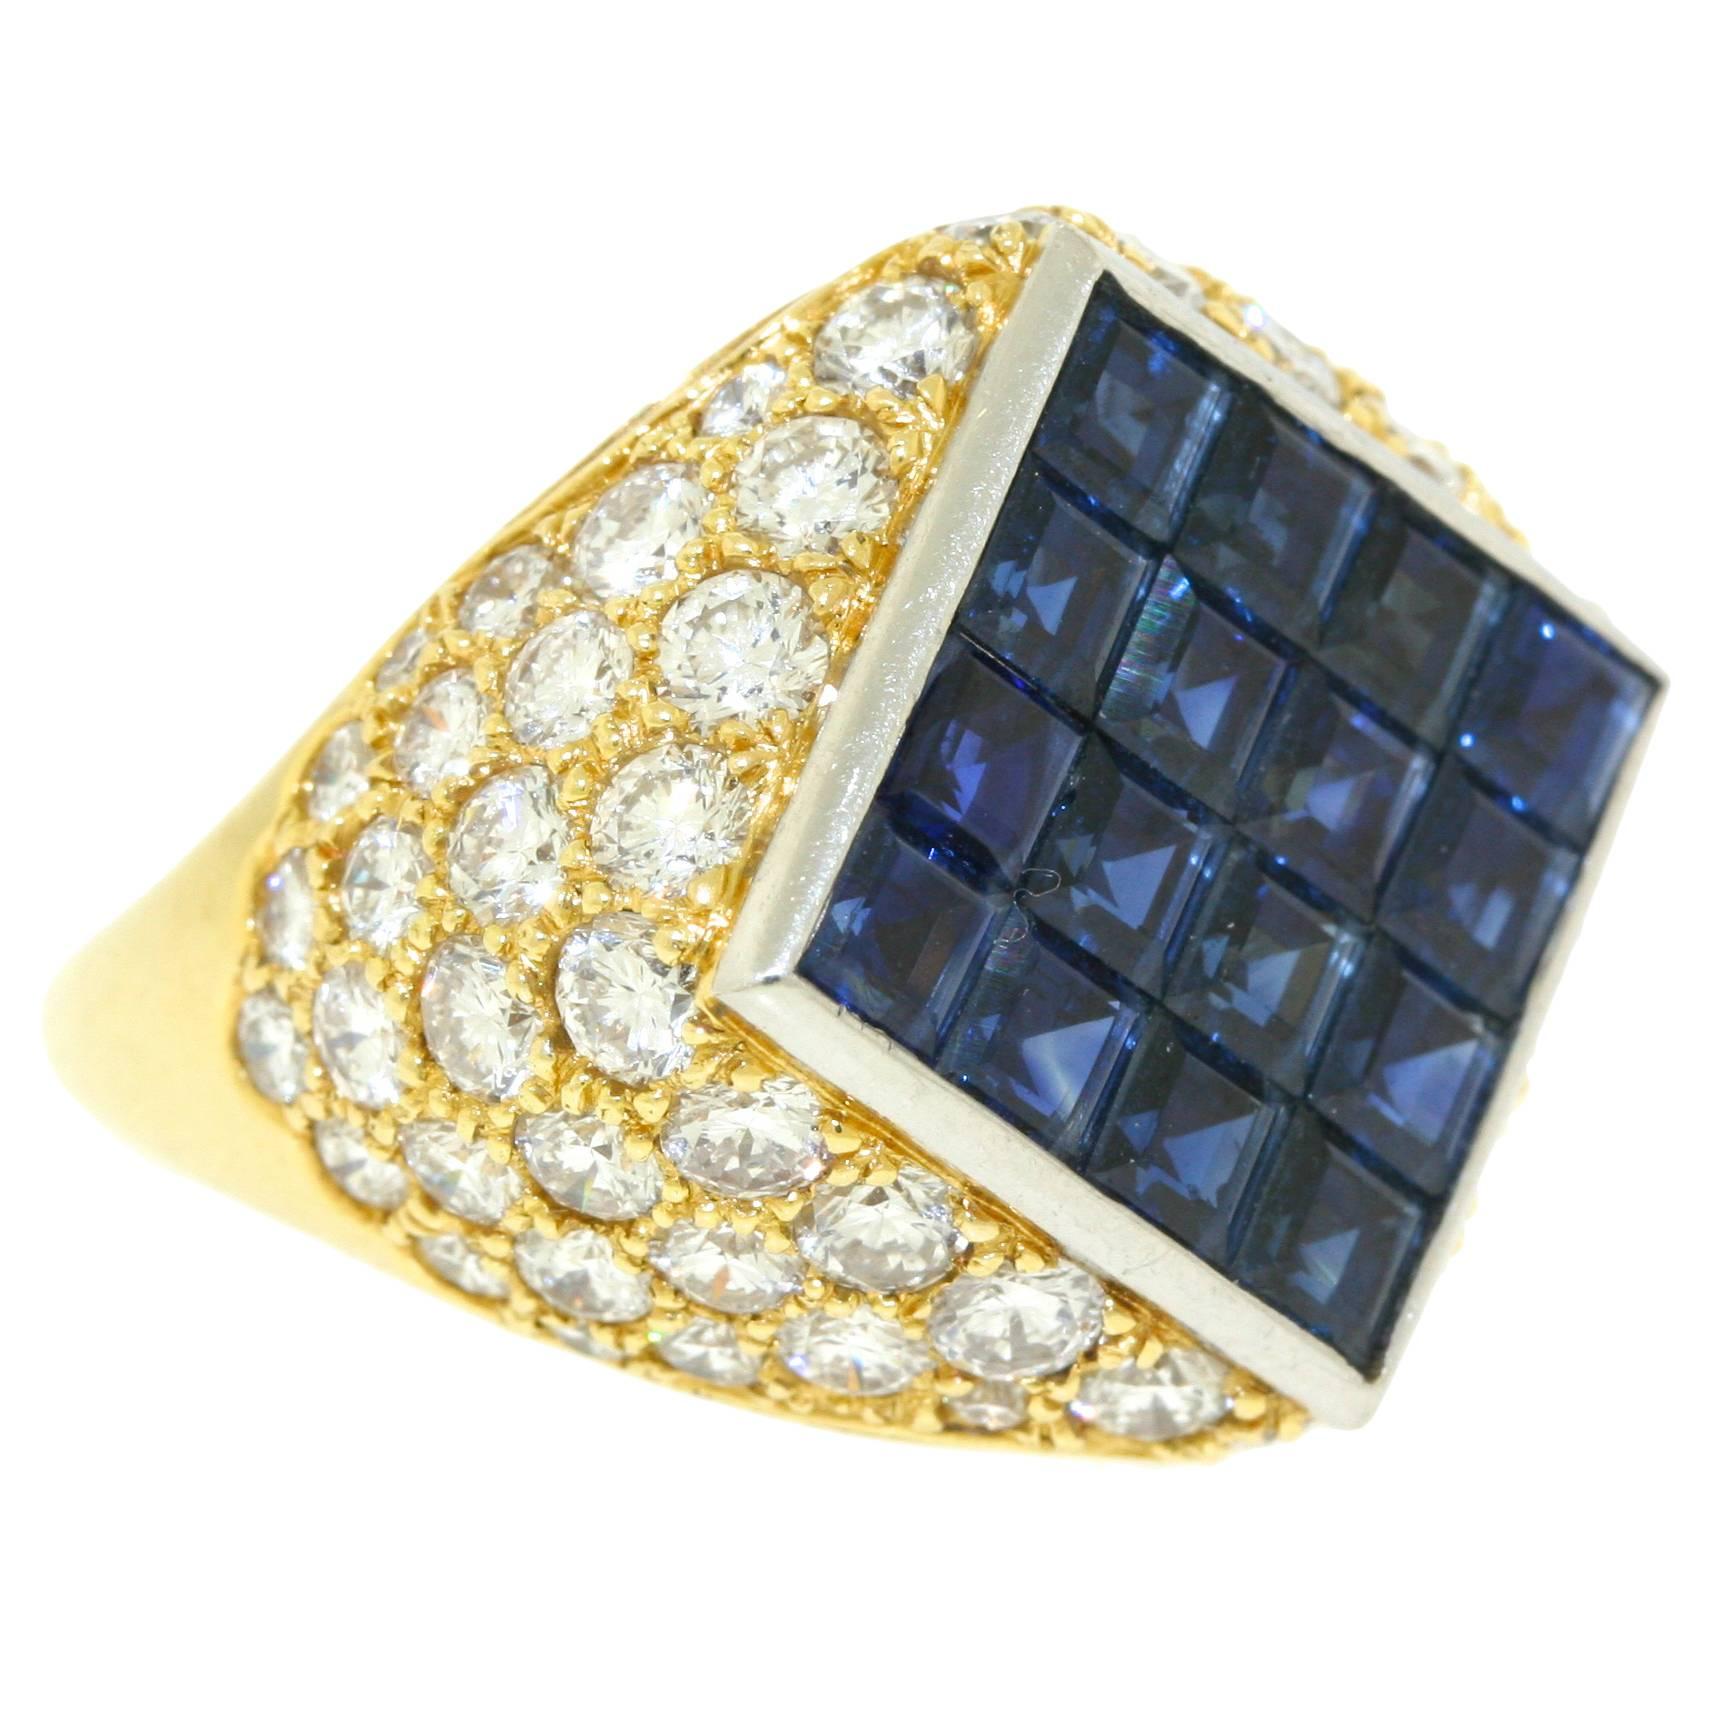 Van Cleef & Arpels Mystery Set Sapphire Diamond Gold Bombe Ring For Sale